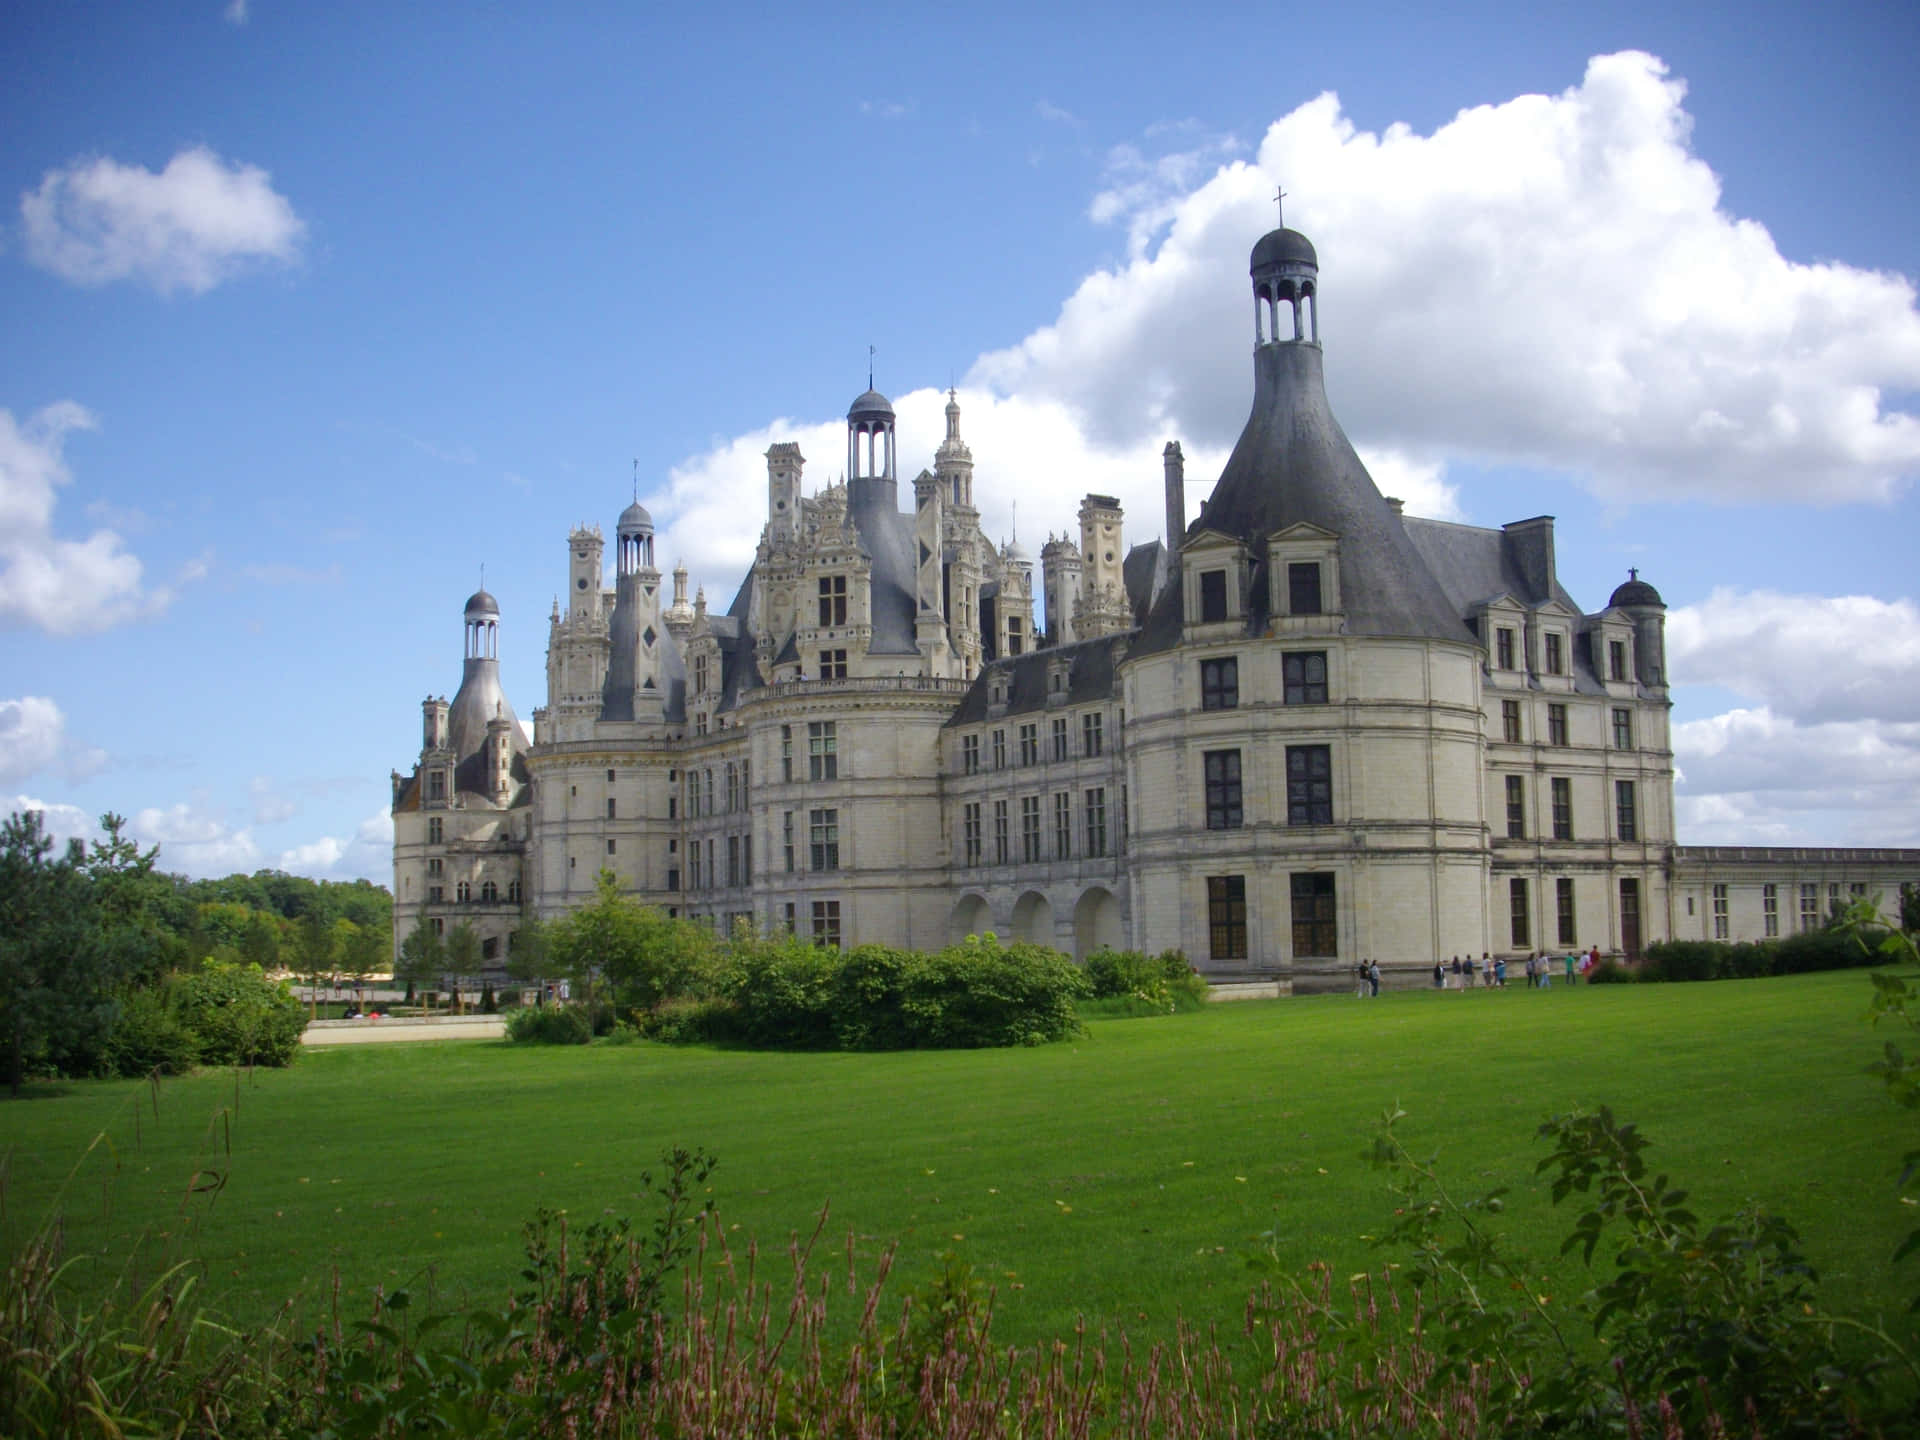 Expansive view of the iconic Chateau De Chambord, France Wallpaper